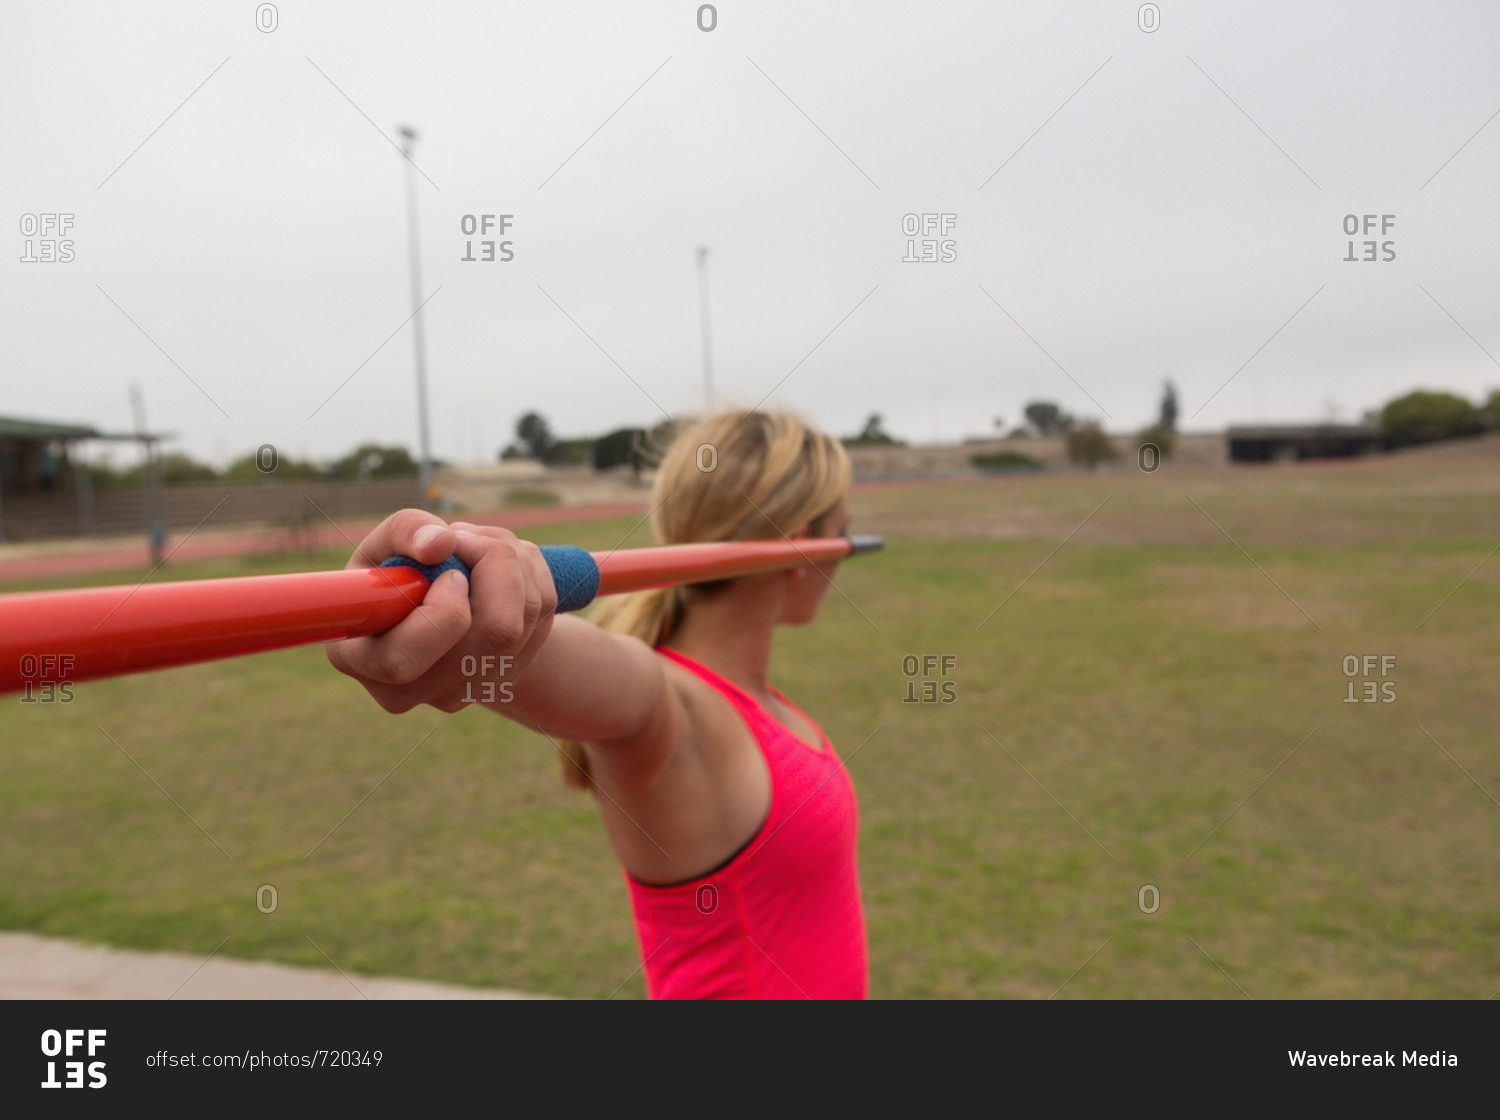 Female athlete practicing javelin throw at sports venue